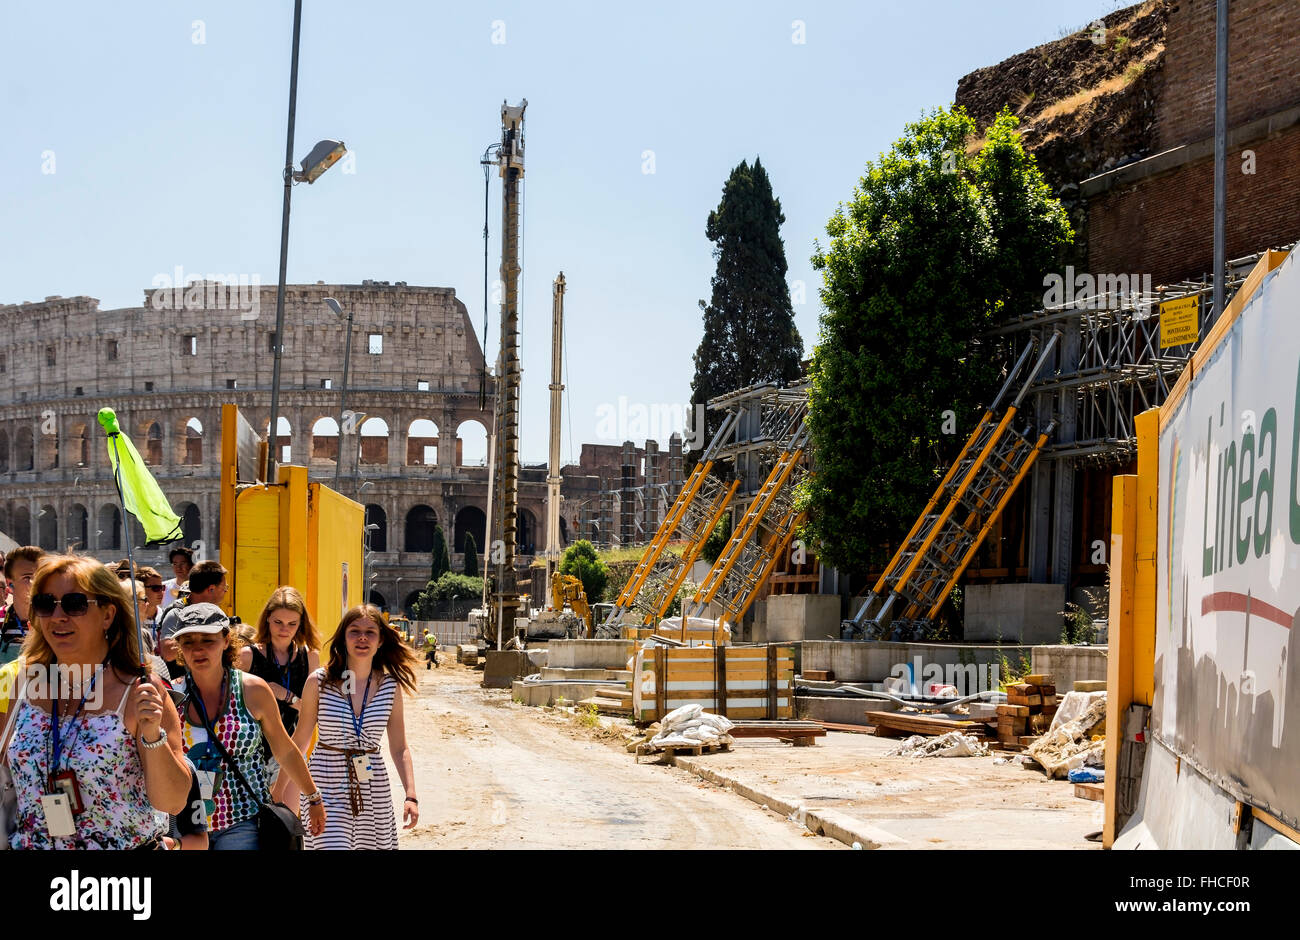 The new, third metro / subway line in Rome requires massive works to protect the historic centre around the Forum and Colosseum. Stock Photo